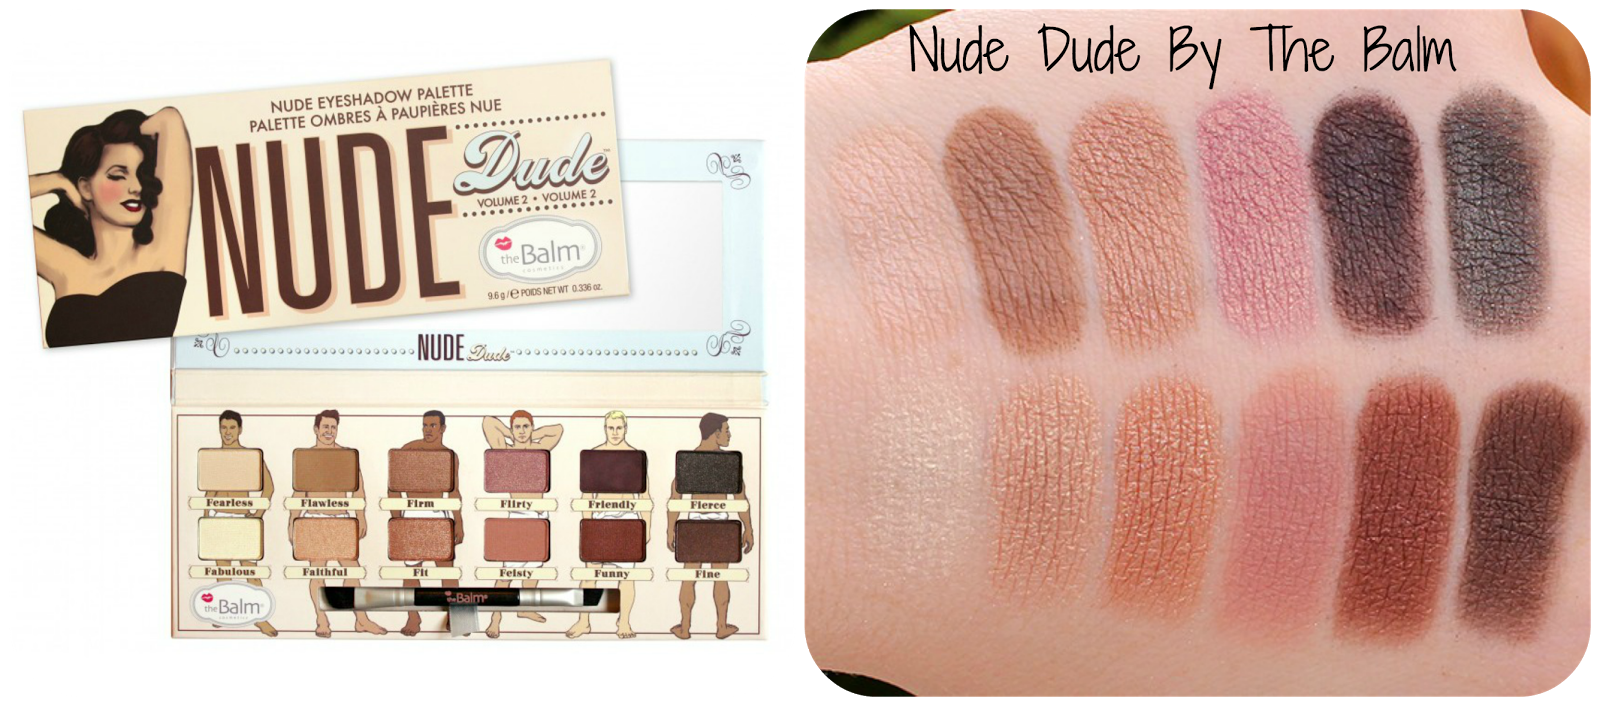 Thebalm Nude Dude Nude Eyeshadow Palette Review Swatches